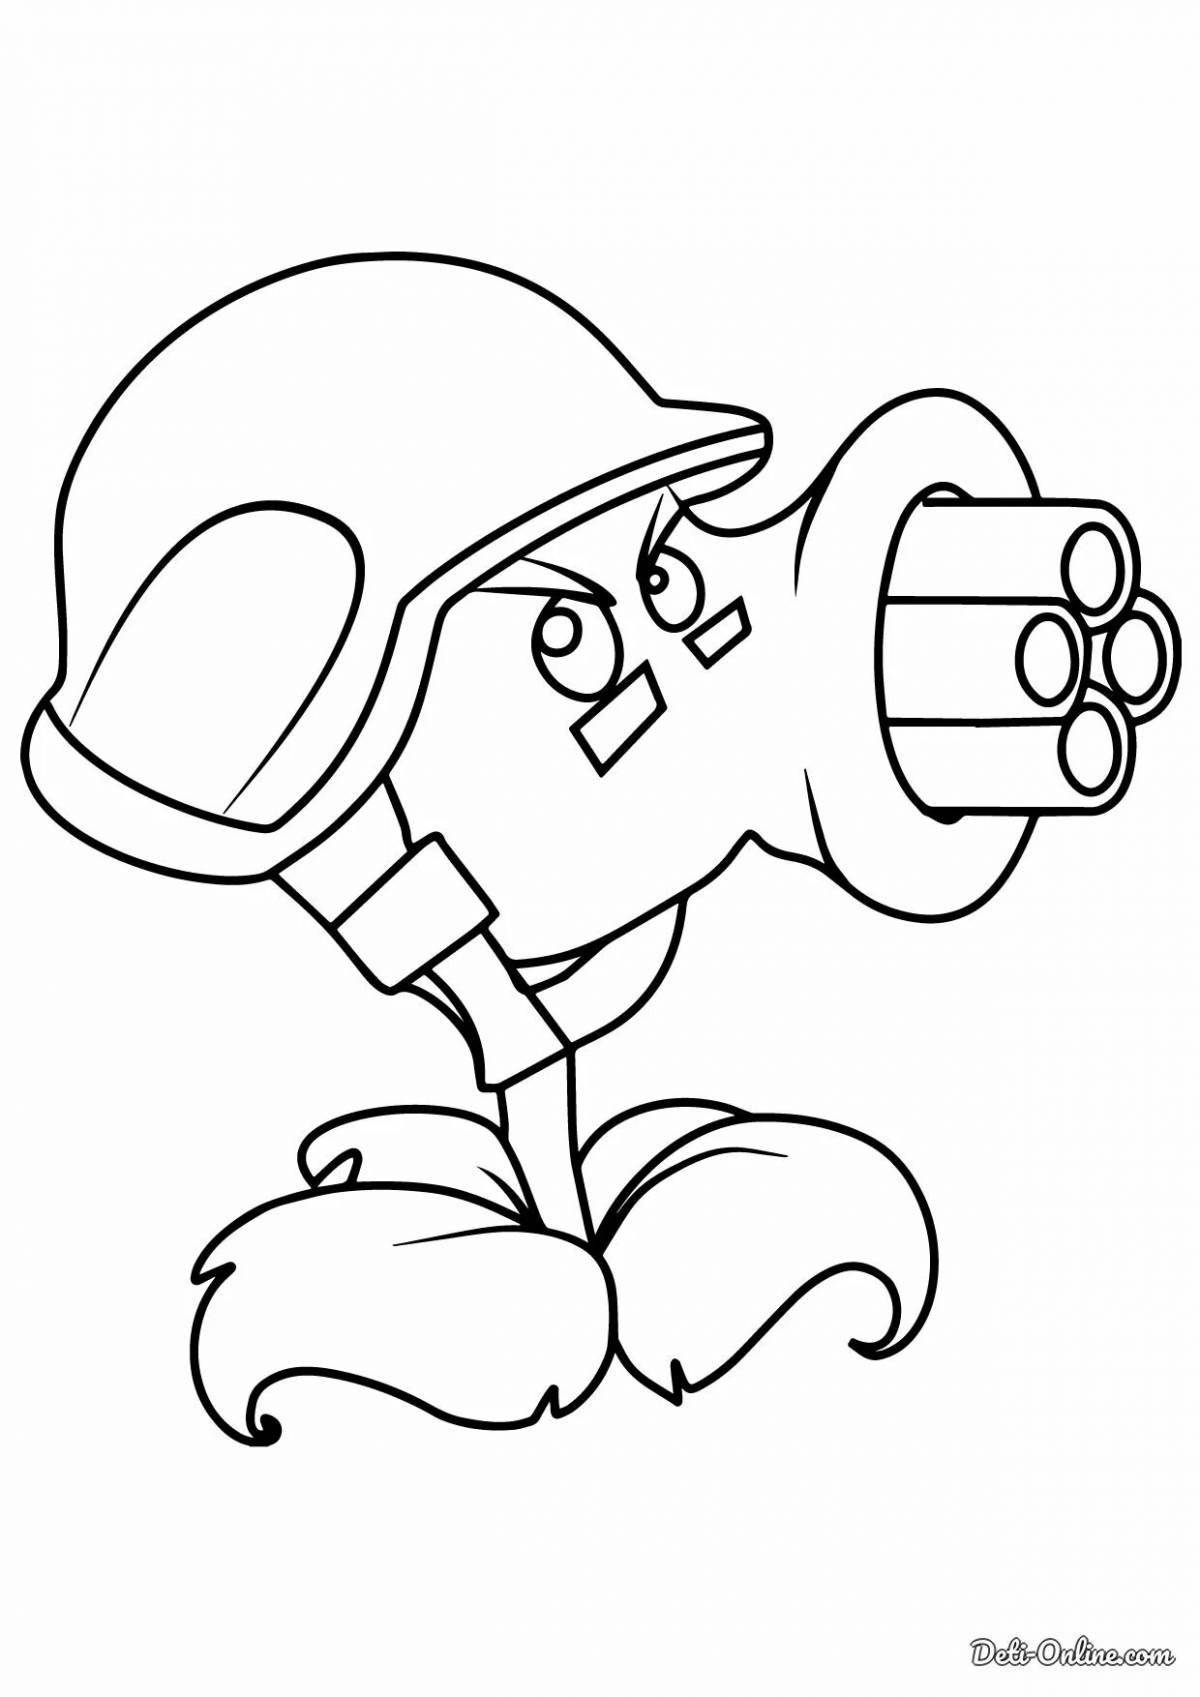 Coloring page dynamic pea shooters plants vs zombies